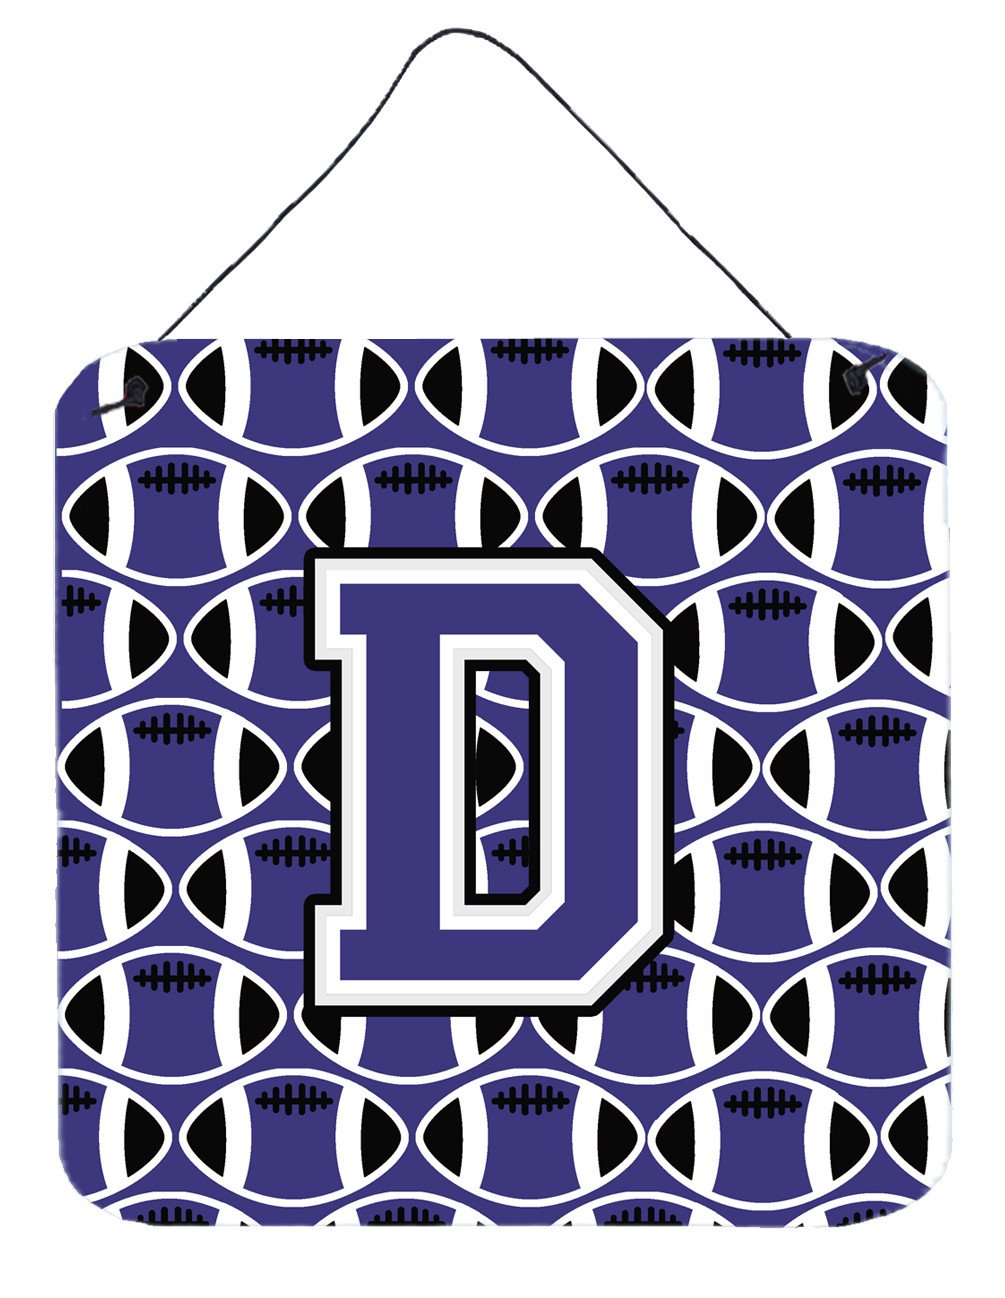 Letter D Football Purple and White Wall or Door Hanging Prints CJ1068-DDS66 by Caroline's Treasures